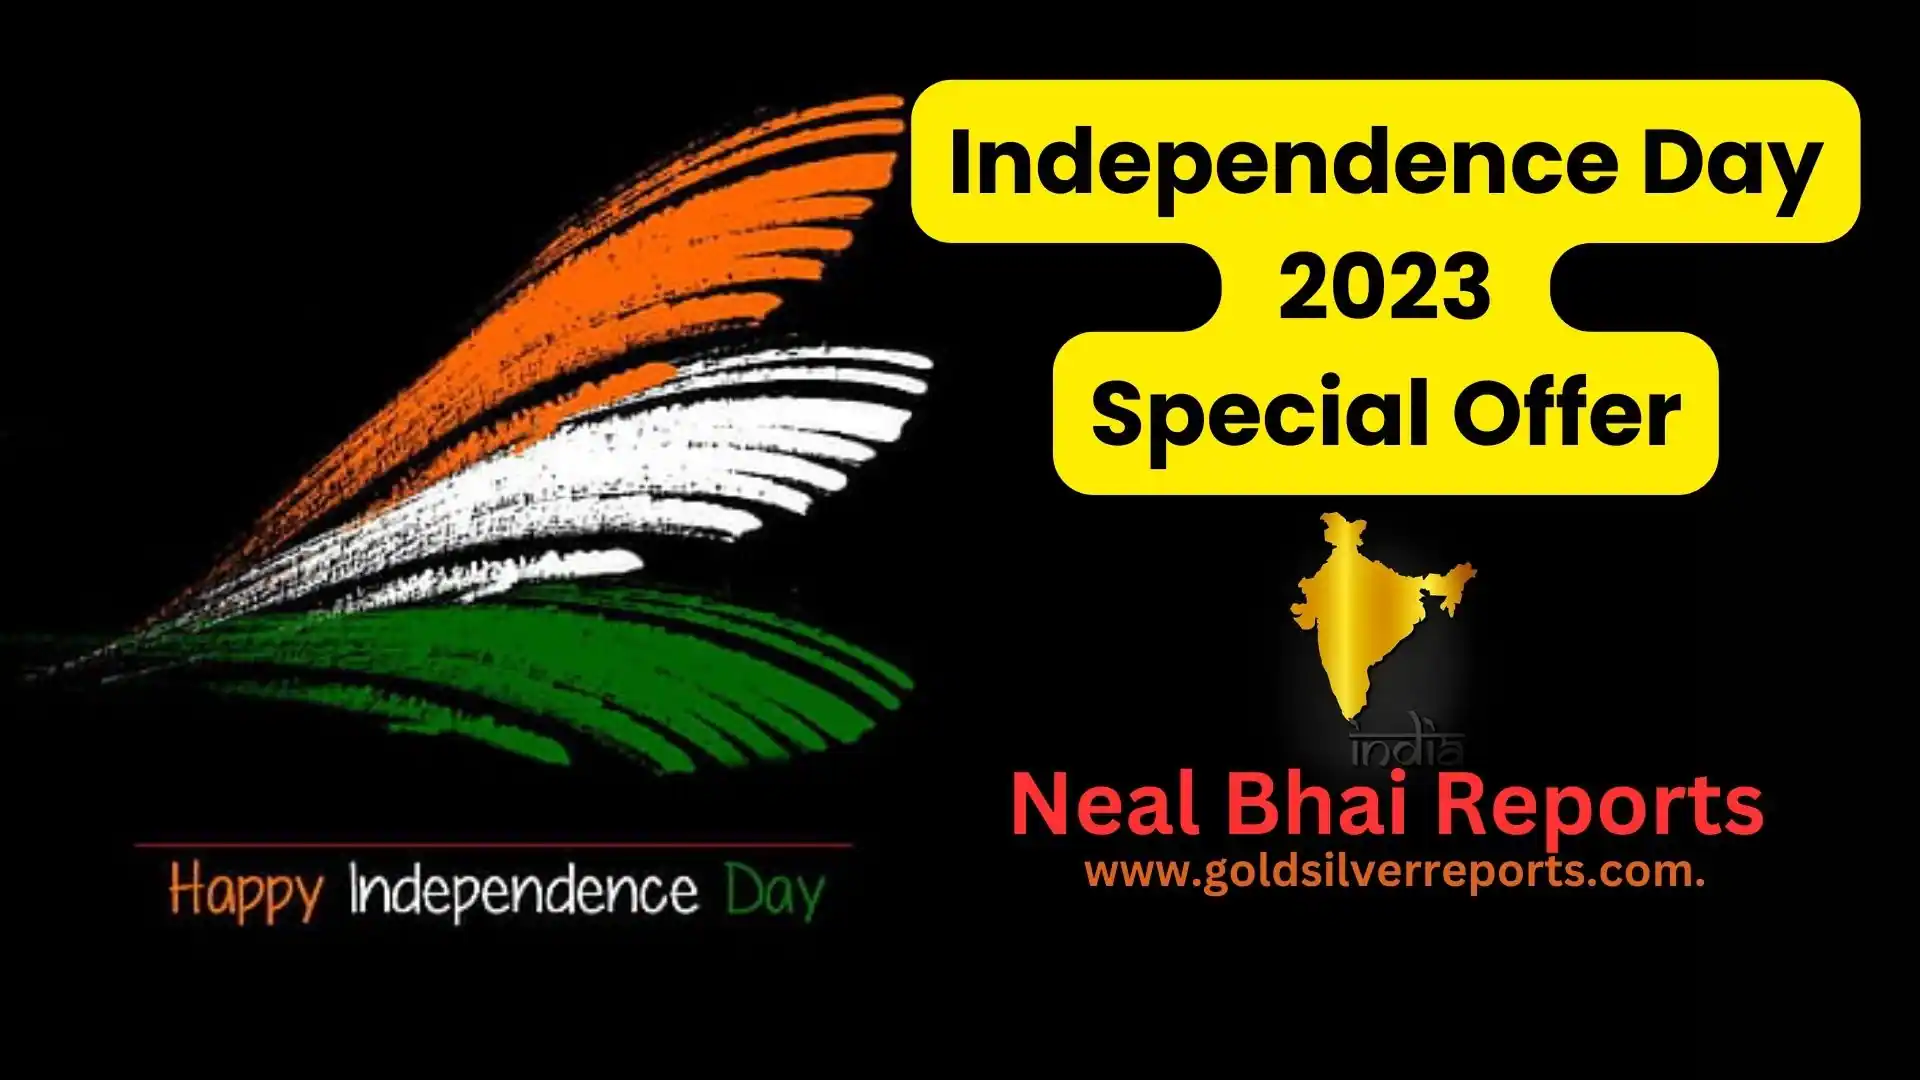 Subscribe Today: Independence Day 2023 Special Offer, Subscribe For 1 Year | All in One Pack - MCX, Equity, Option, Nifty and Bank Nifty